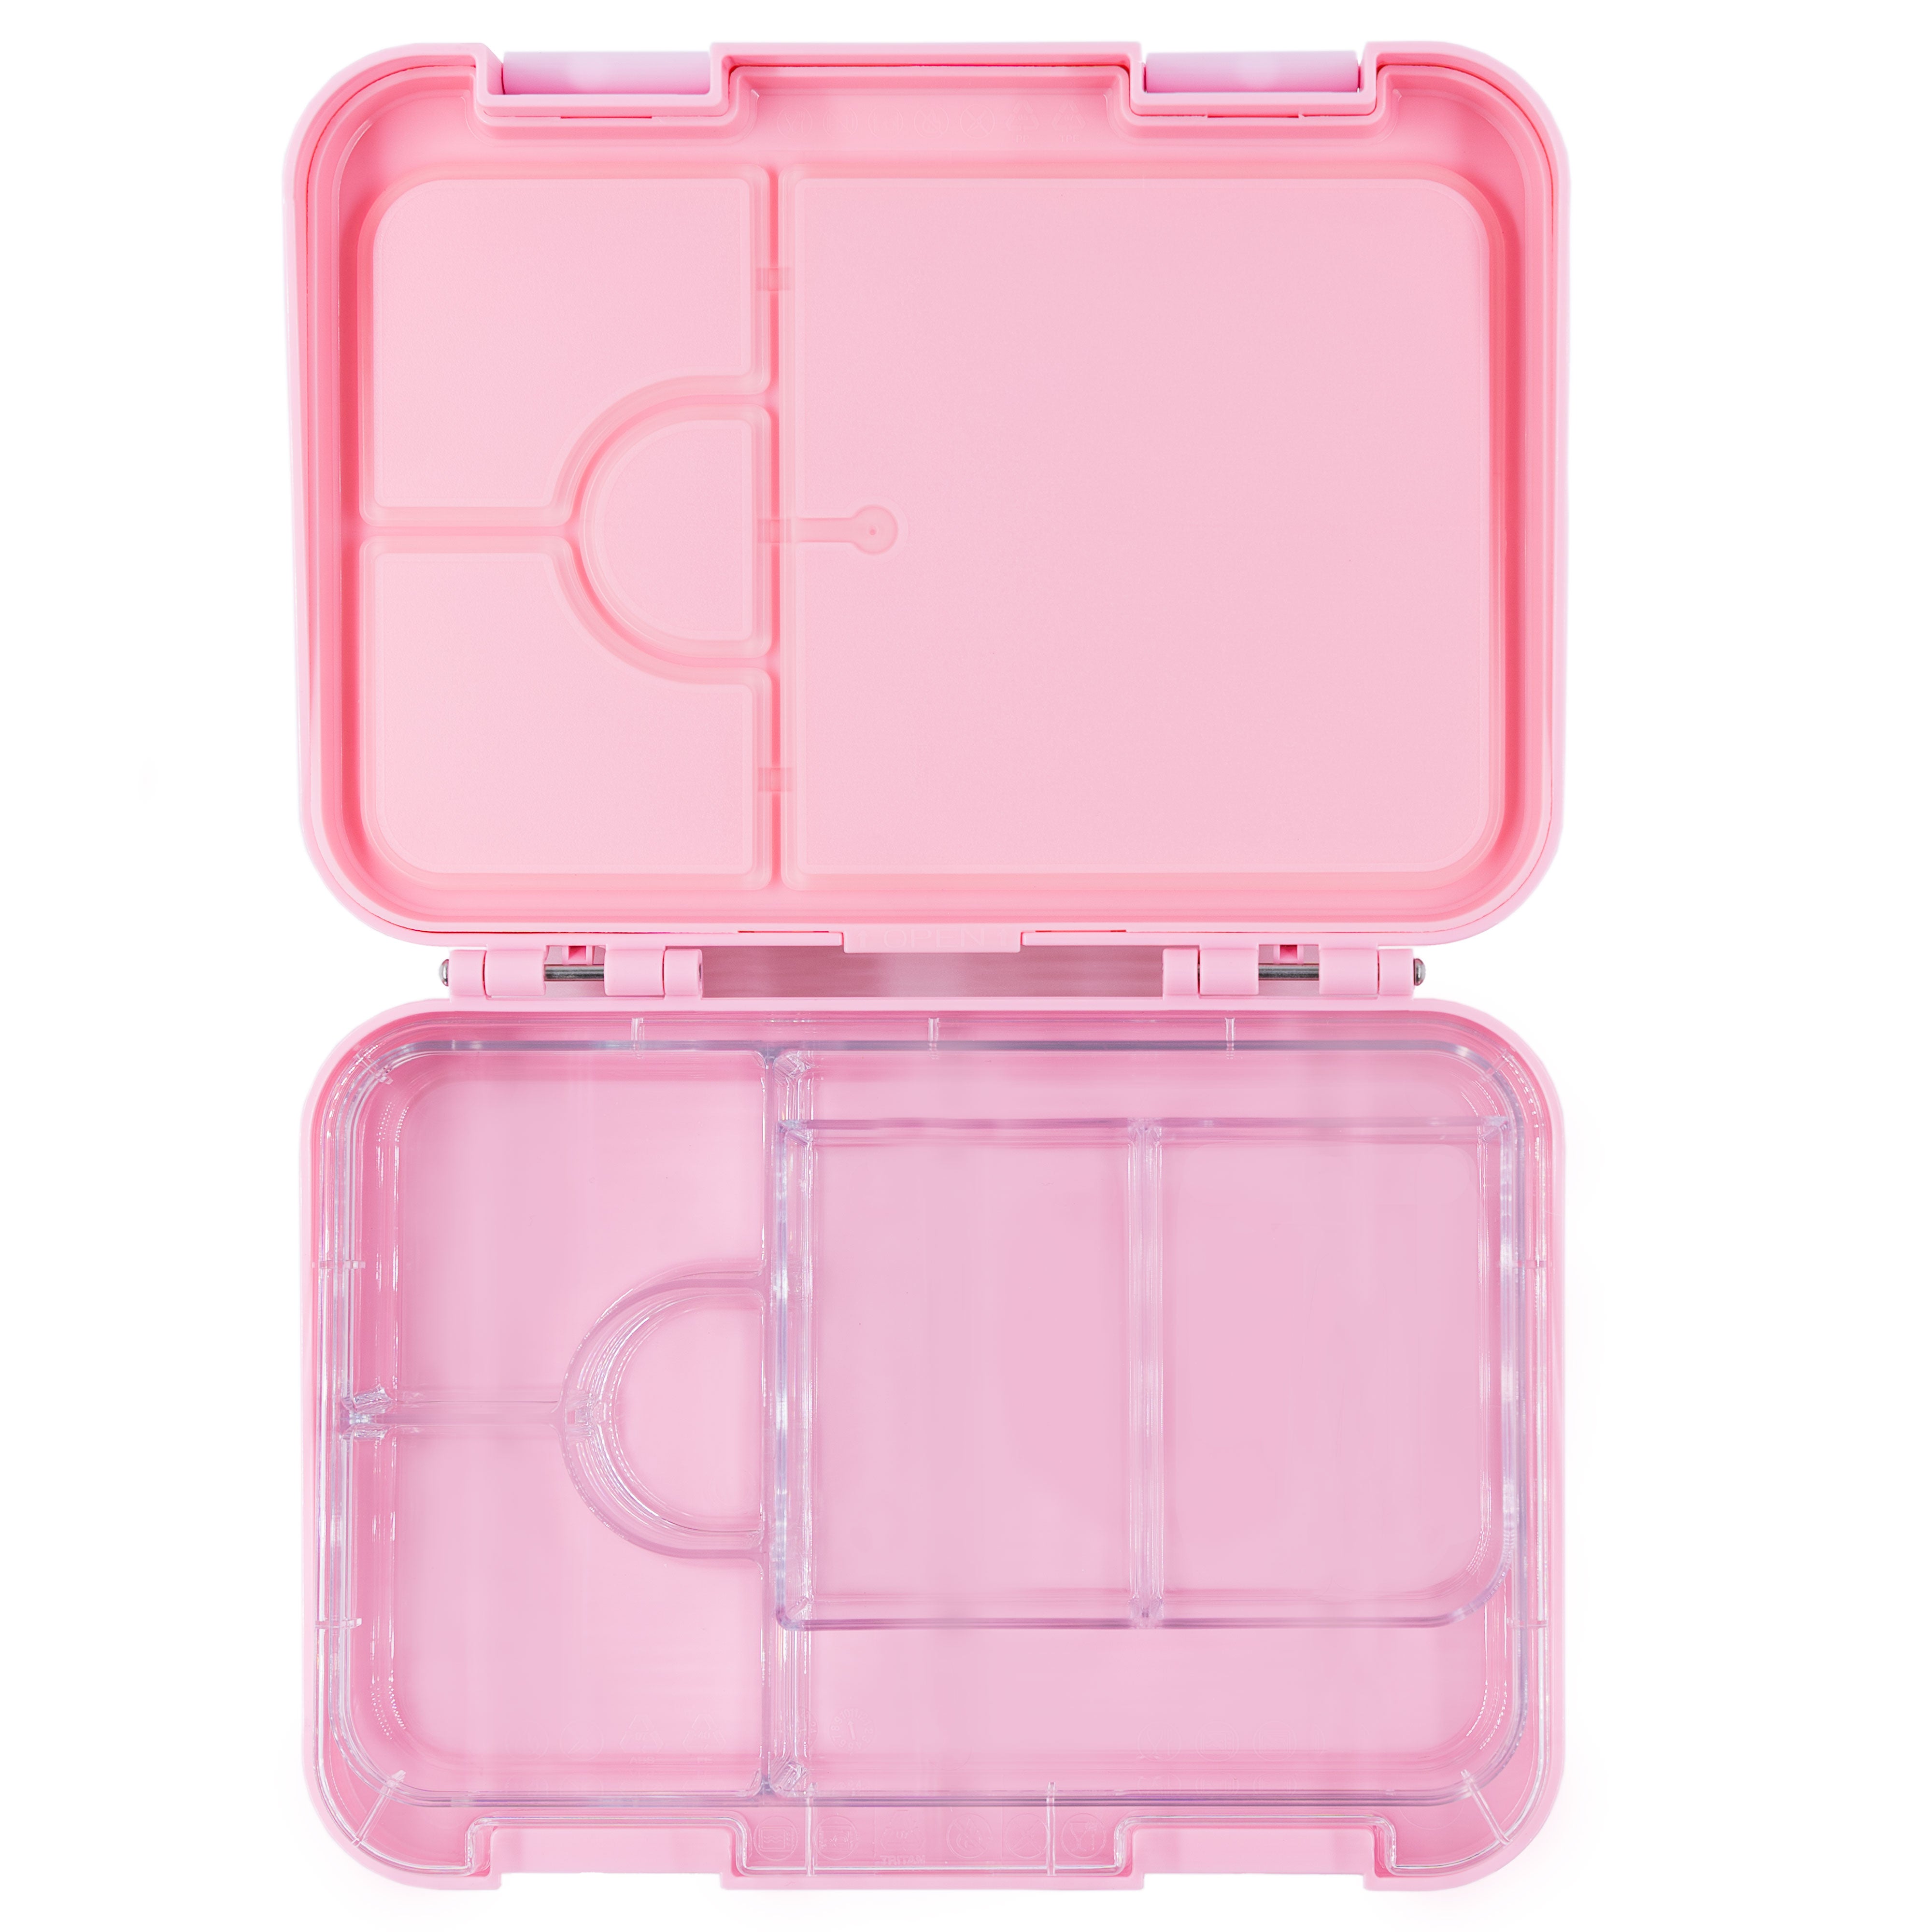 Snack Attack Bento Box or Lunch Box for Kids 4 & 6 Convertible Compartments  | Portion Lunch Box | Food Graded Materials BPA FREE & LEAK PROOF| Made of